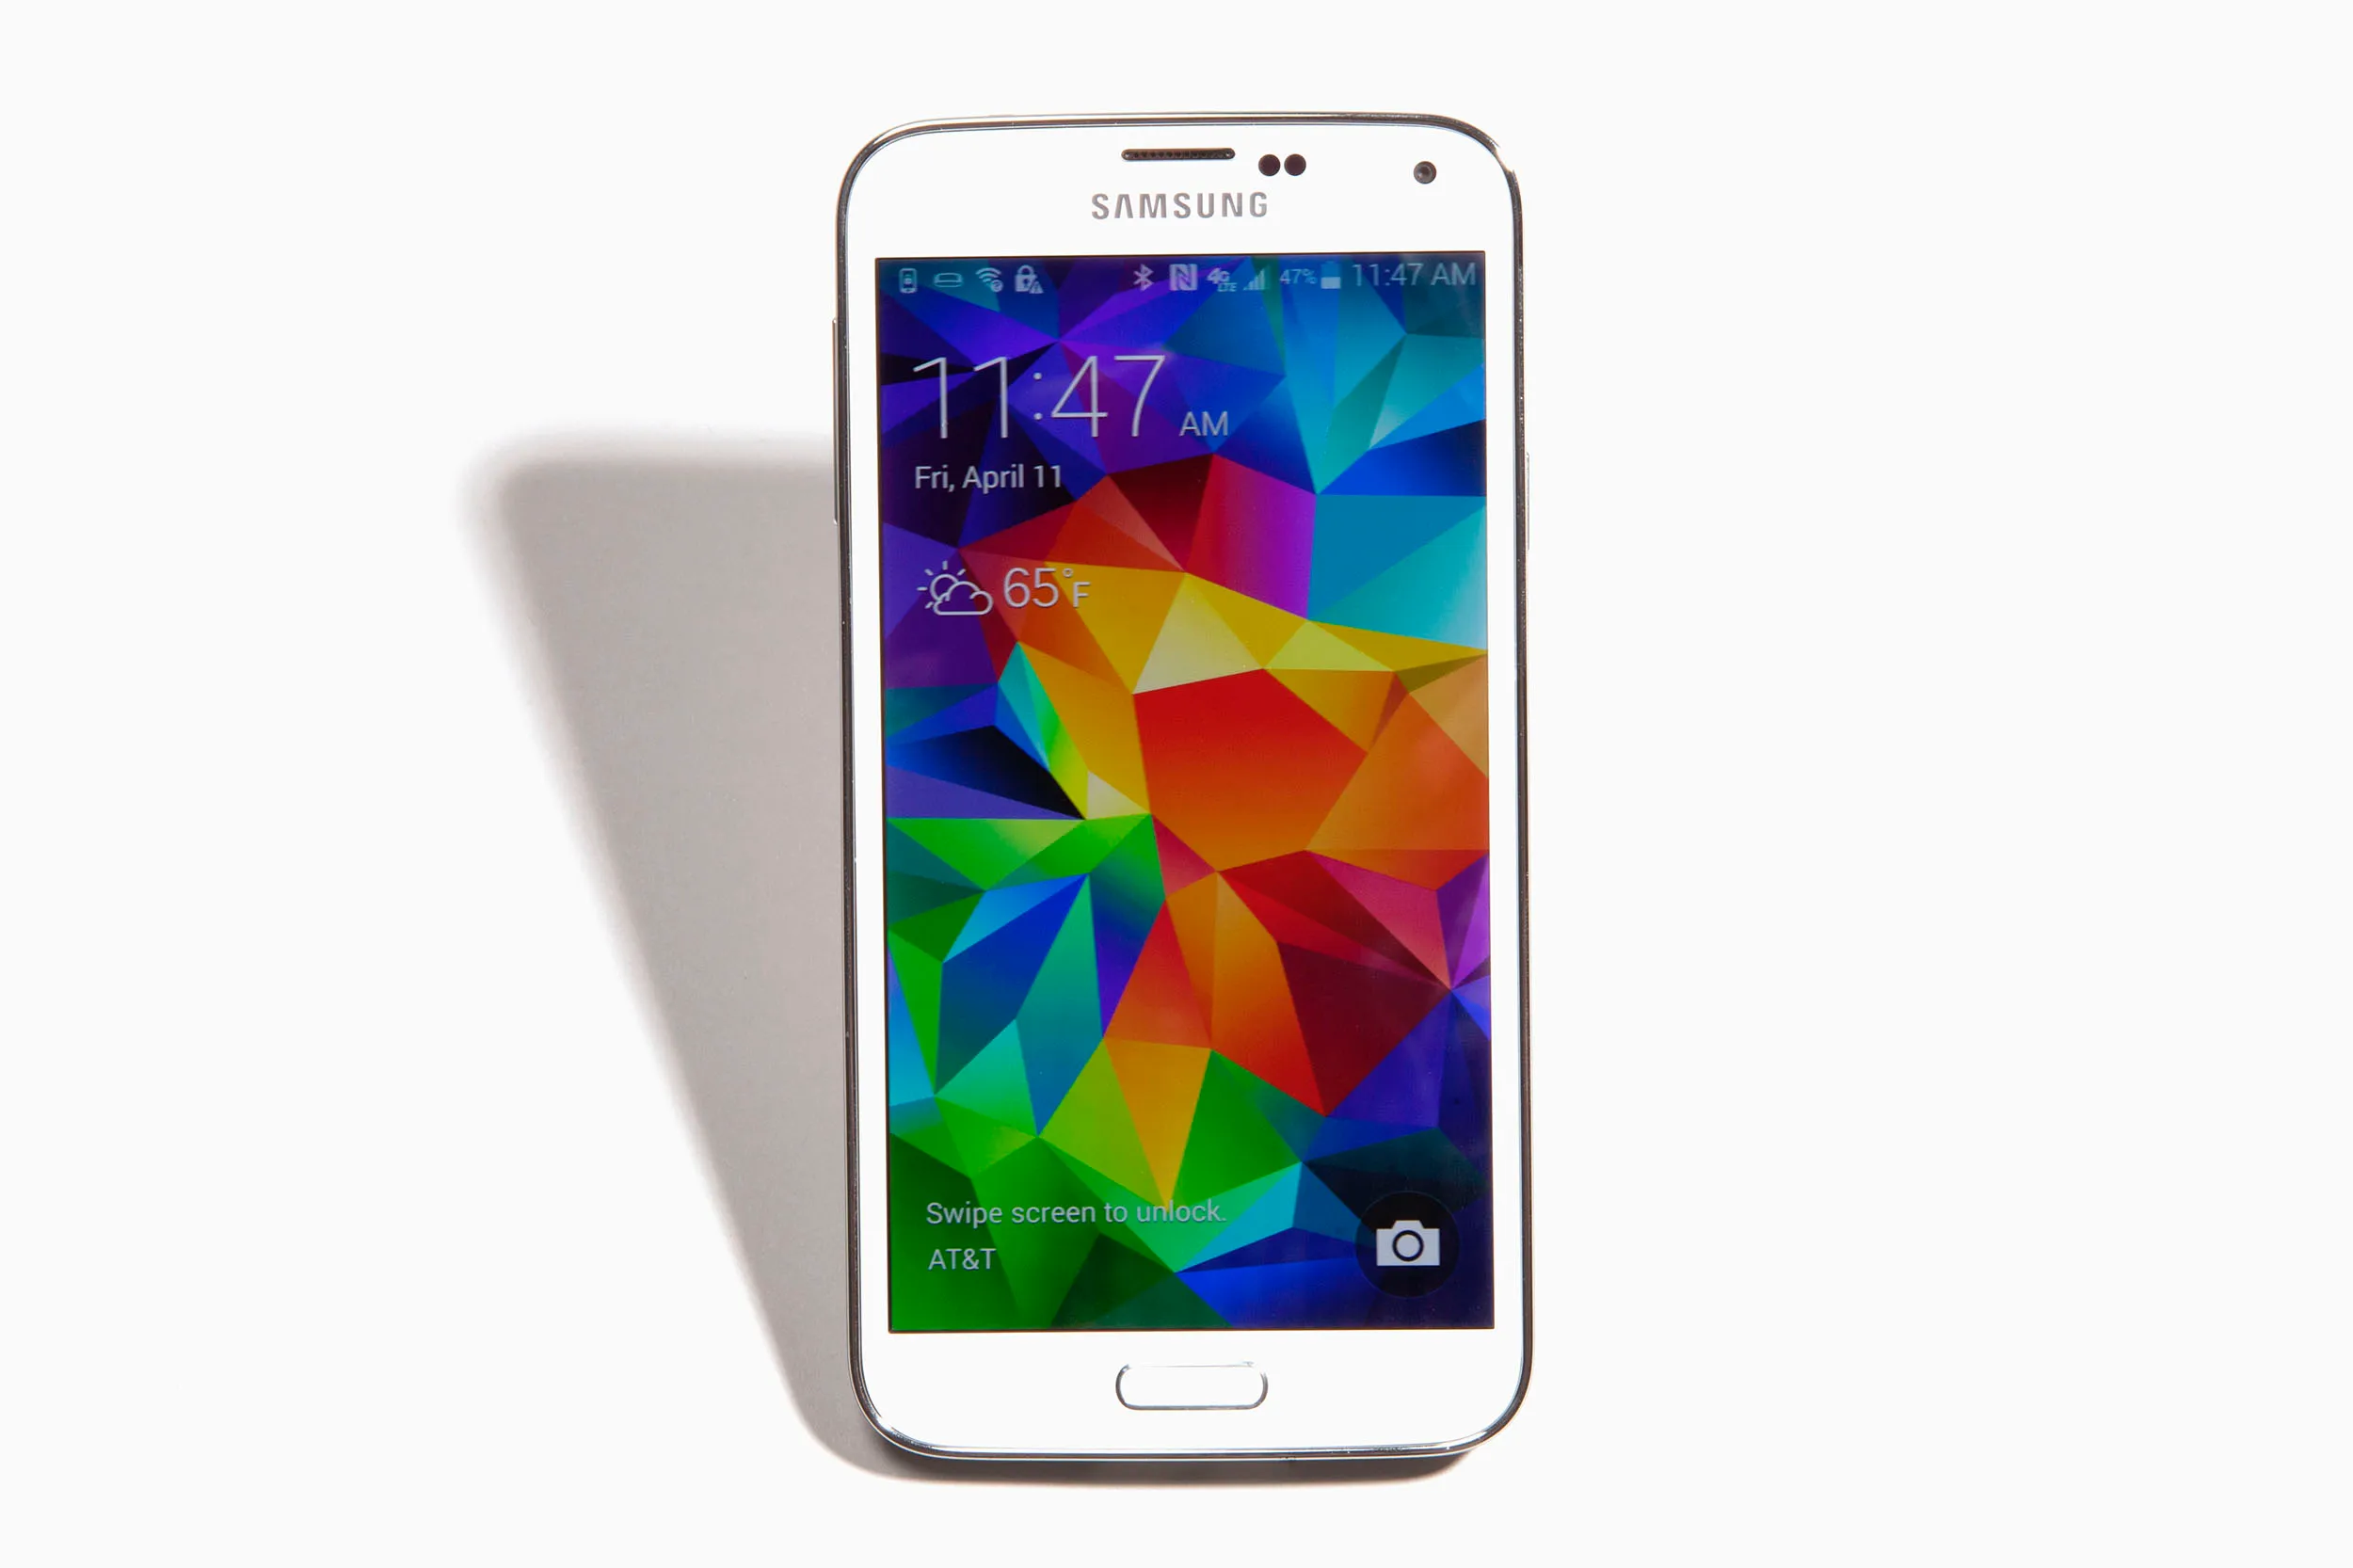 Why does the Samsung Galaxy S5 constantly crash when using Messenger? Here’s a patch for it: